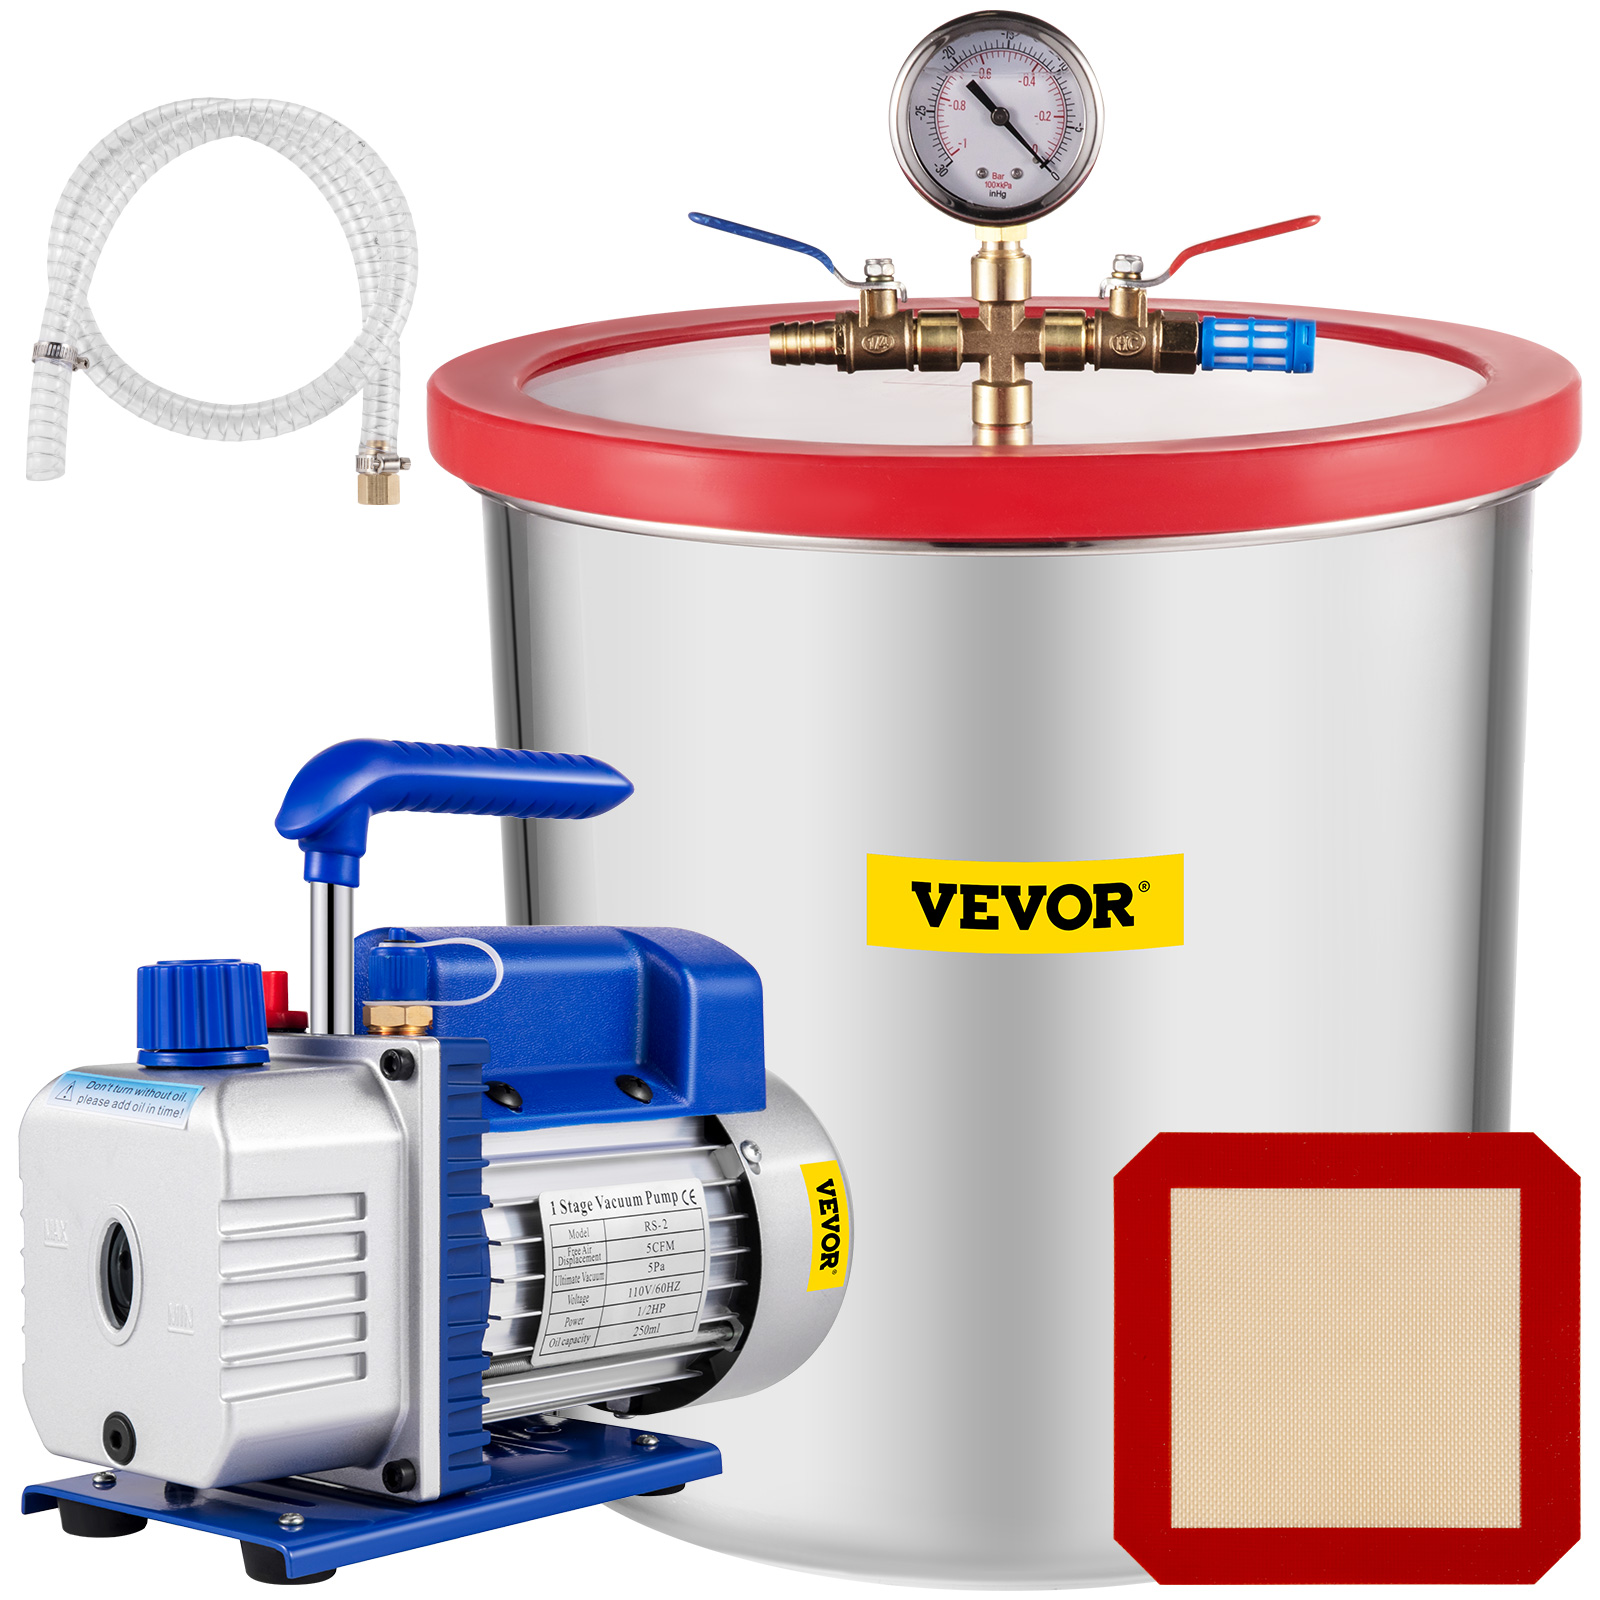 Details about   5CFM Vacuum Pump 5Gallon Vacuum Chamber 10Pa Tool Urethane Degassing Silicone US 